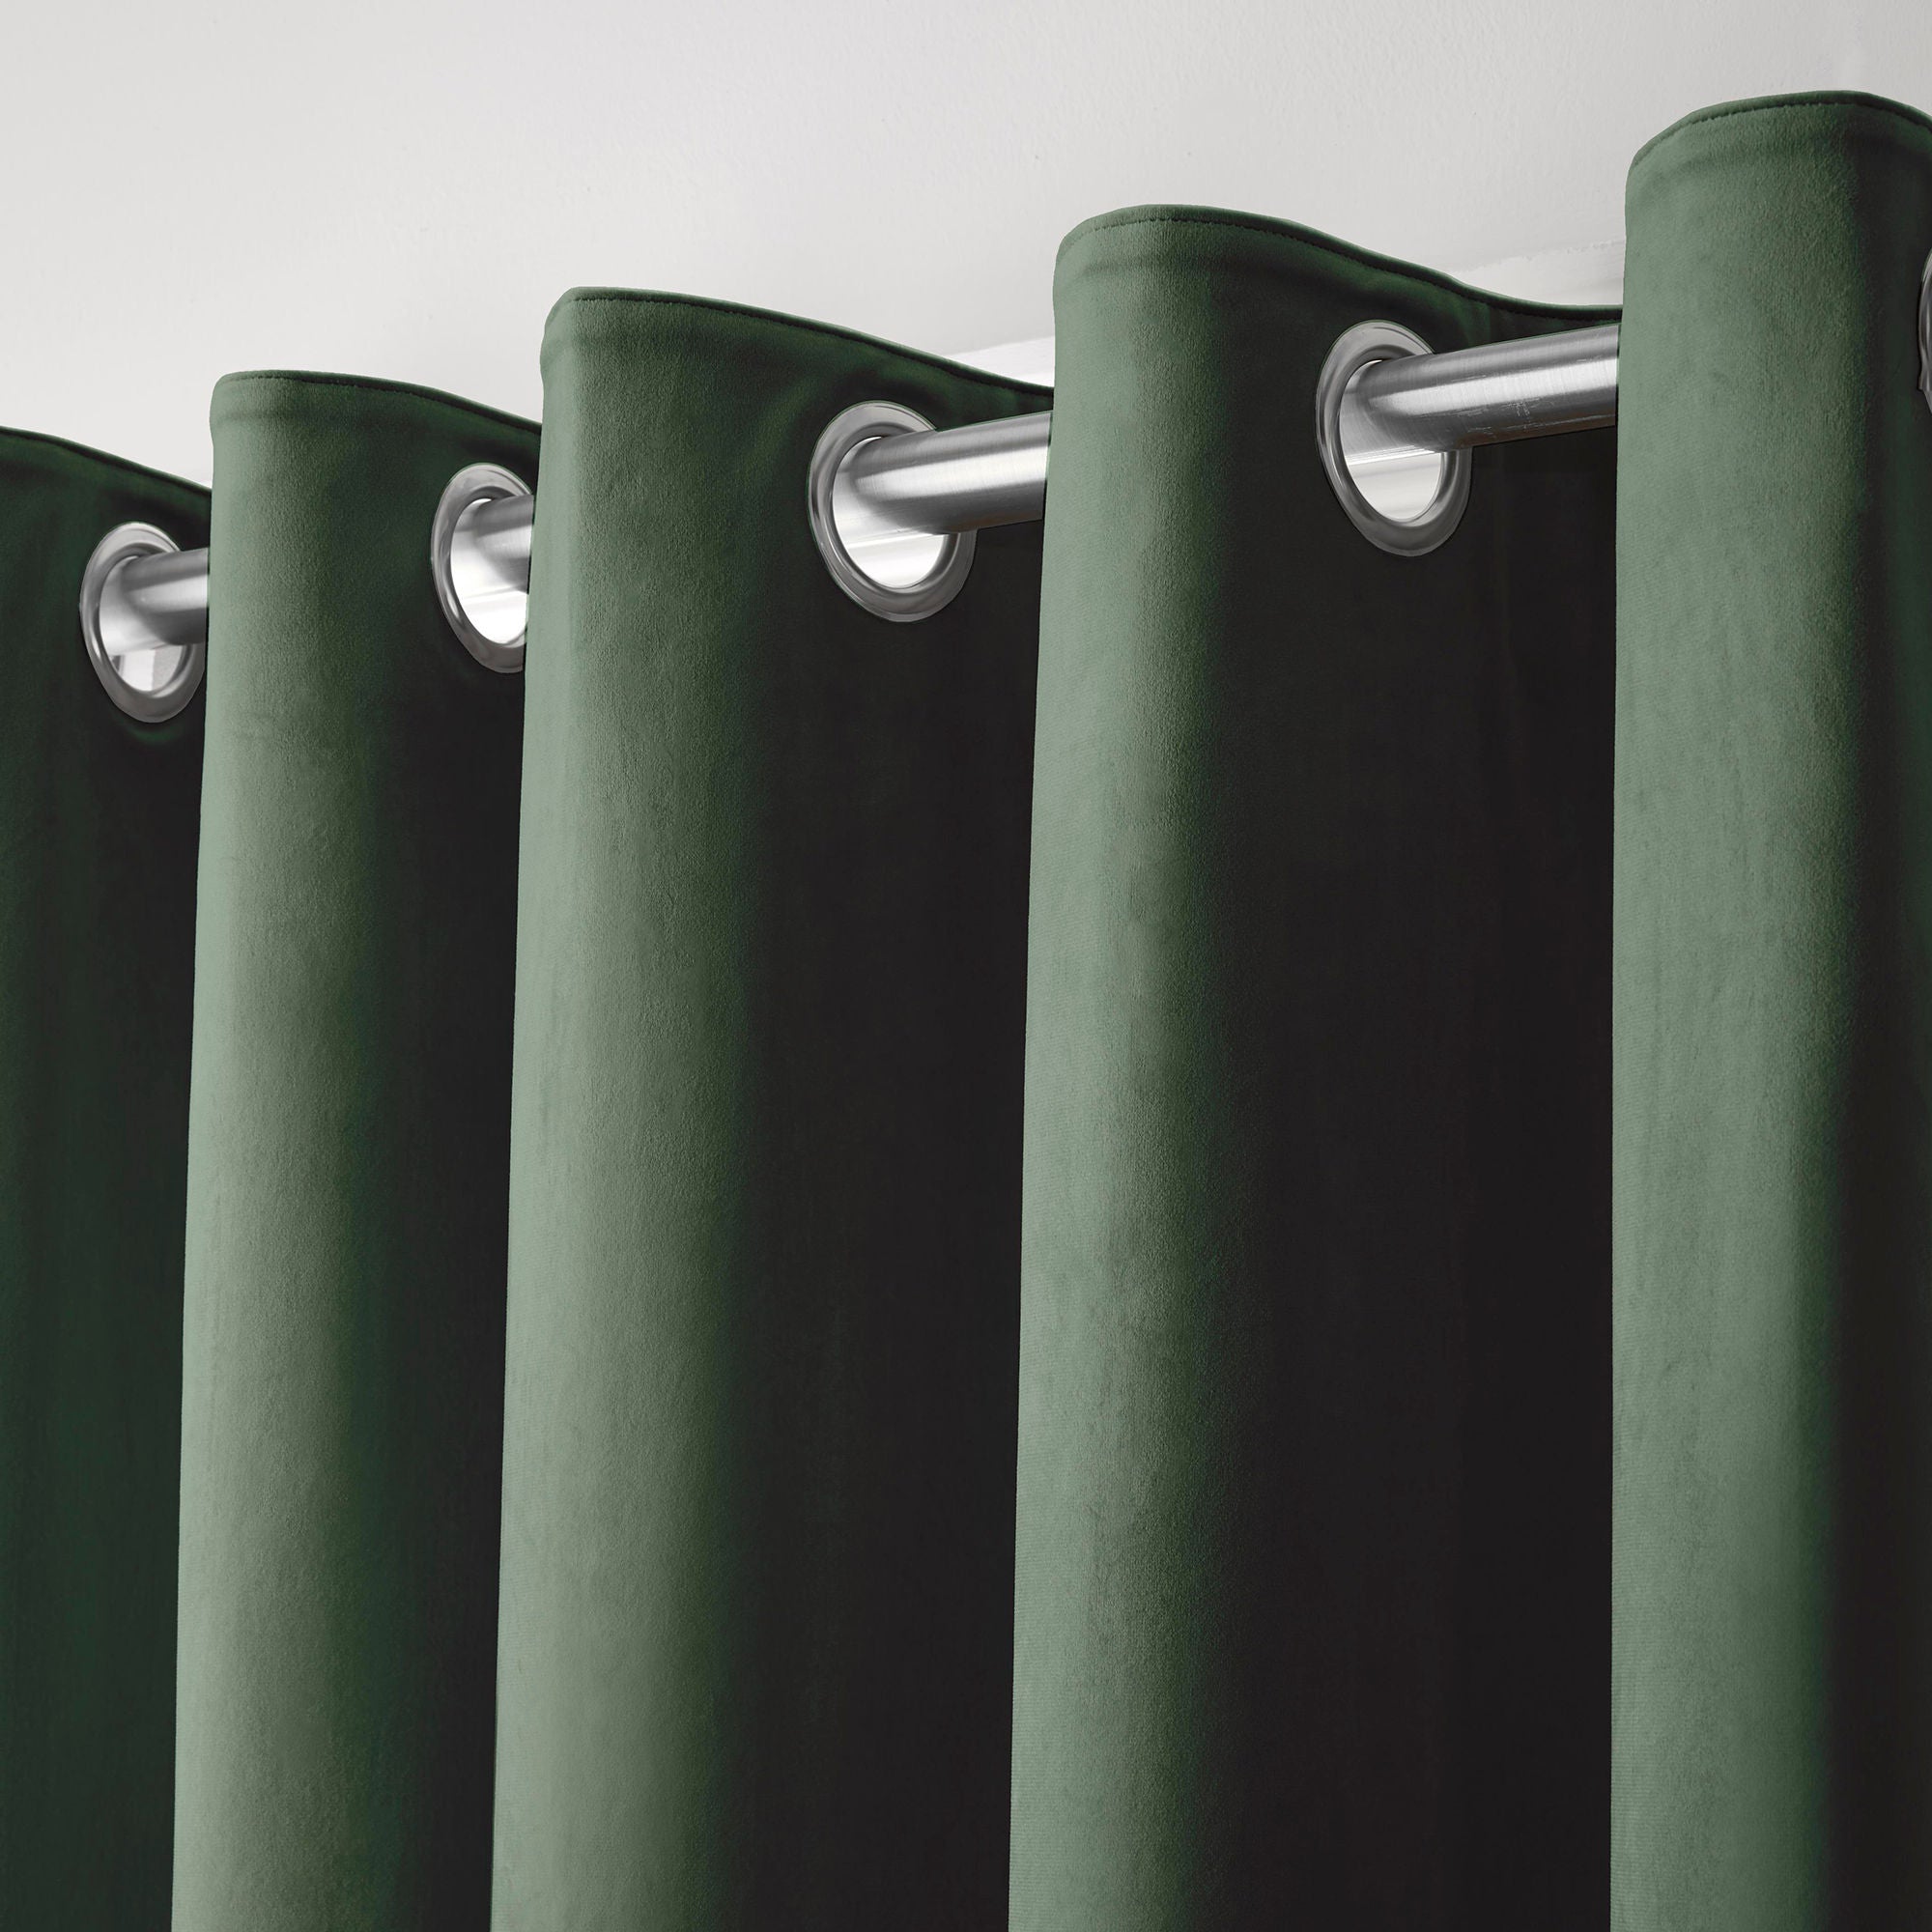 Montrose Pair of Eyelet Curtains by Laurence Llewelyn-Bowen in Bottle Green - Pair of Eyelet Curtains - Laurence Llewelyn-Bowen